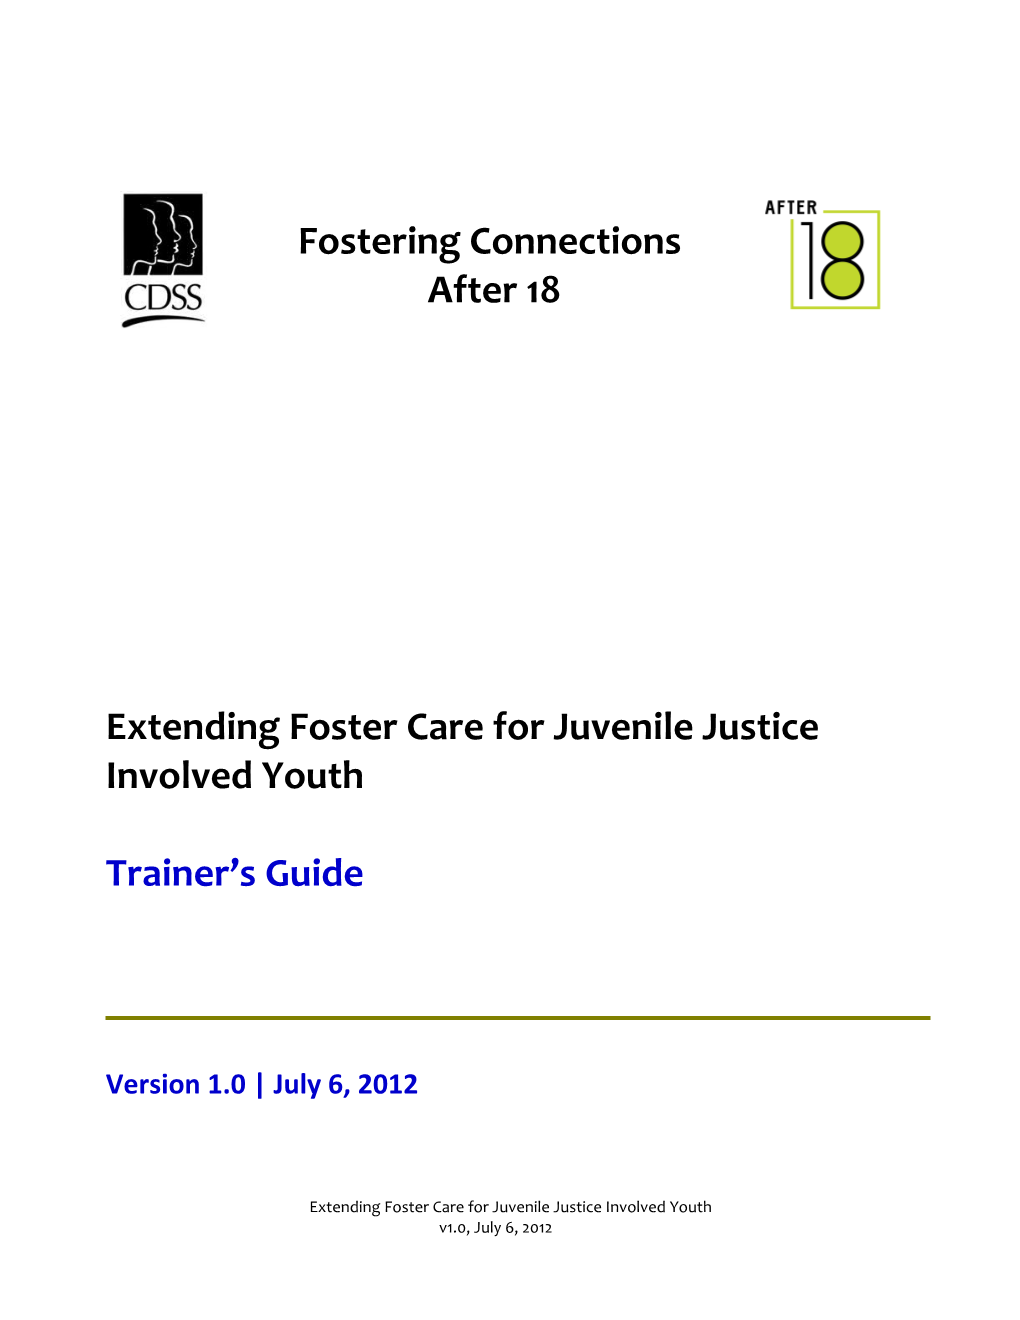 Extending Foster Care for Juvenile Justice Involved Youth